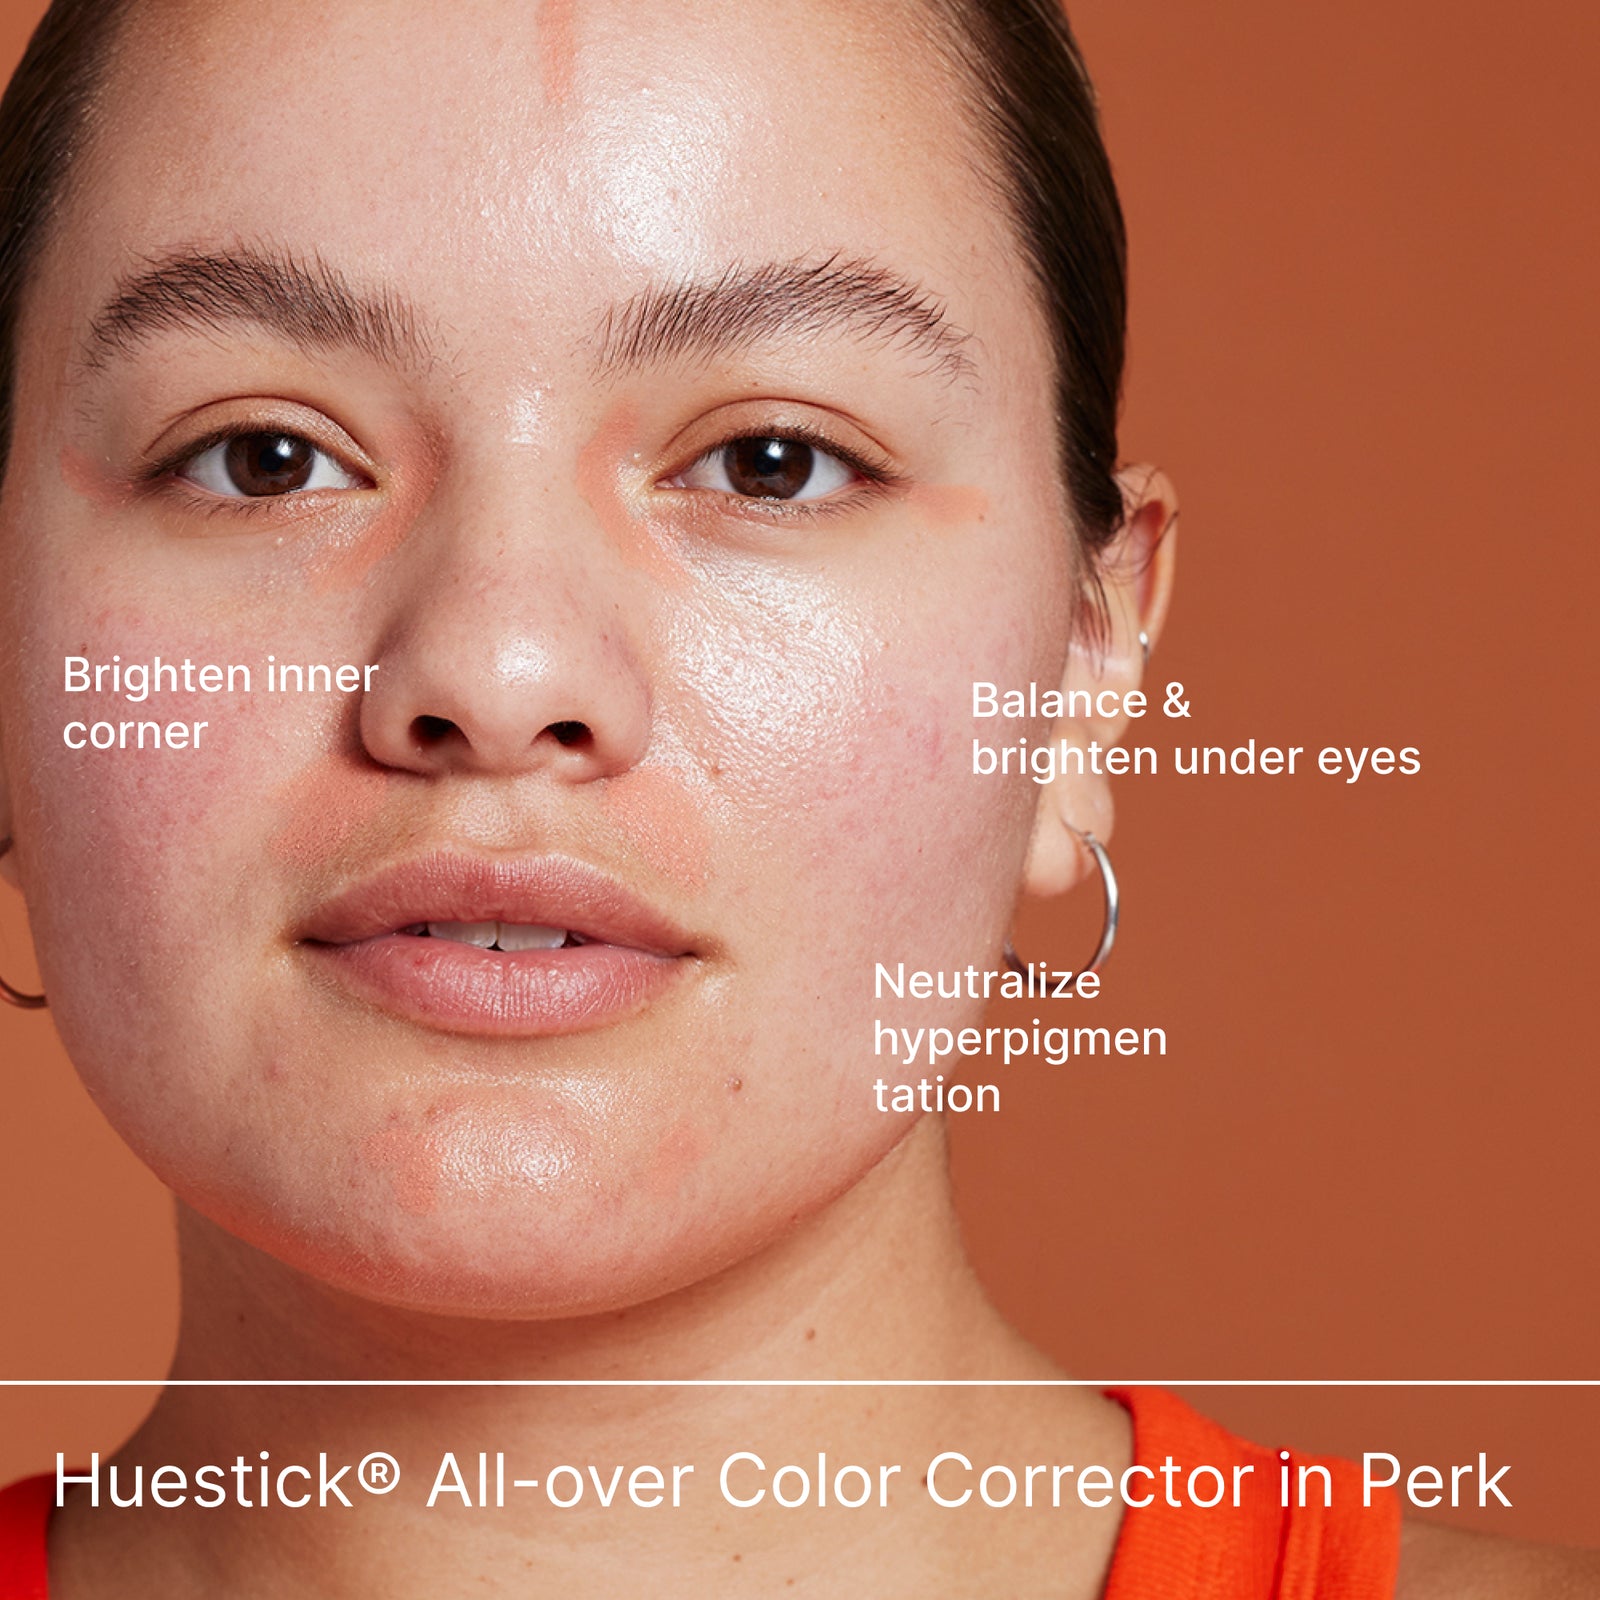 All-over Color Corrector in Perk